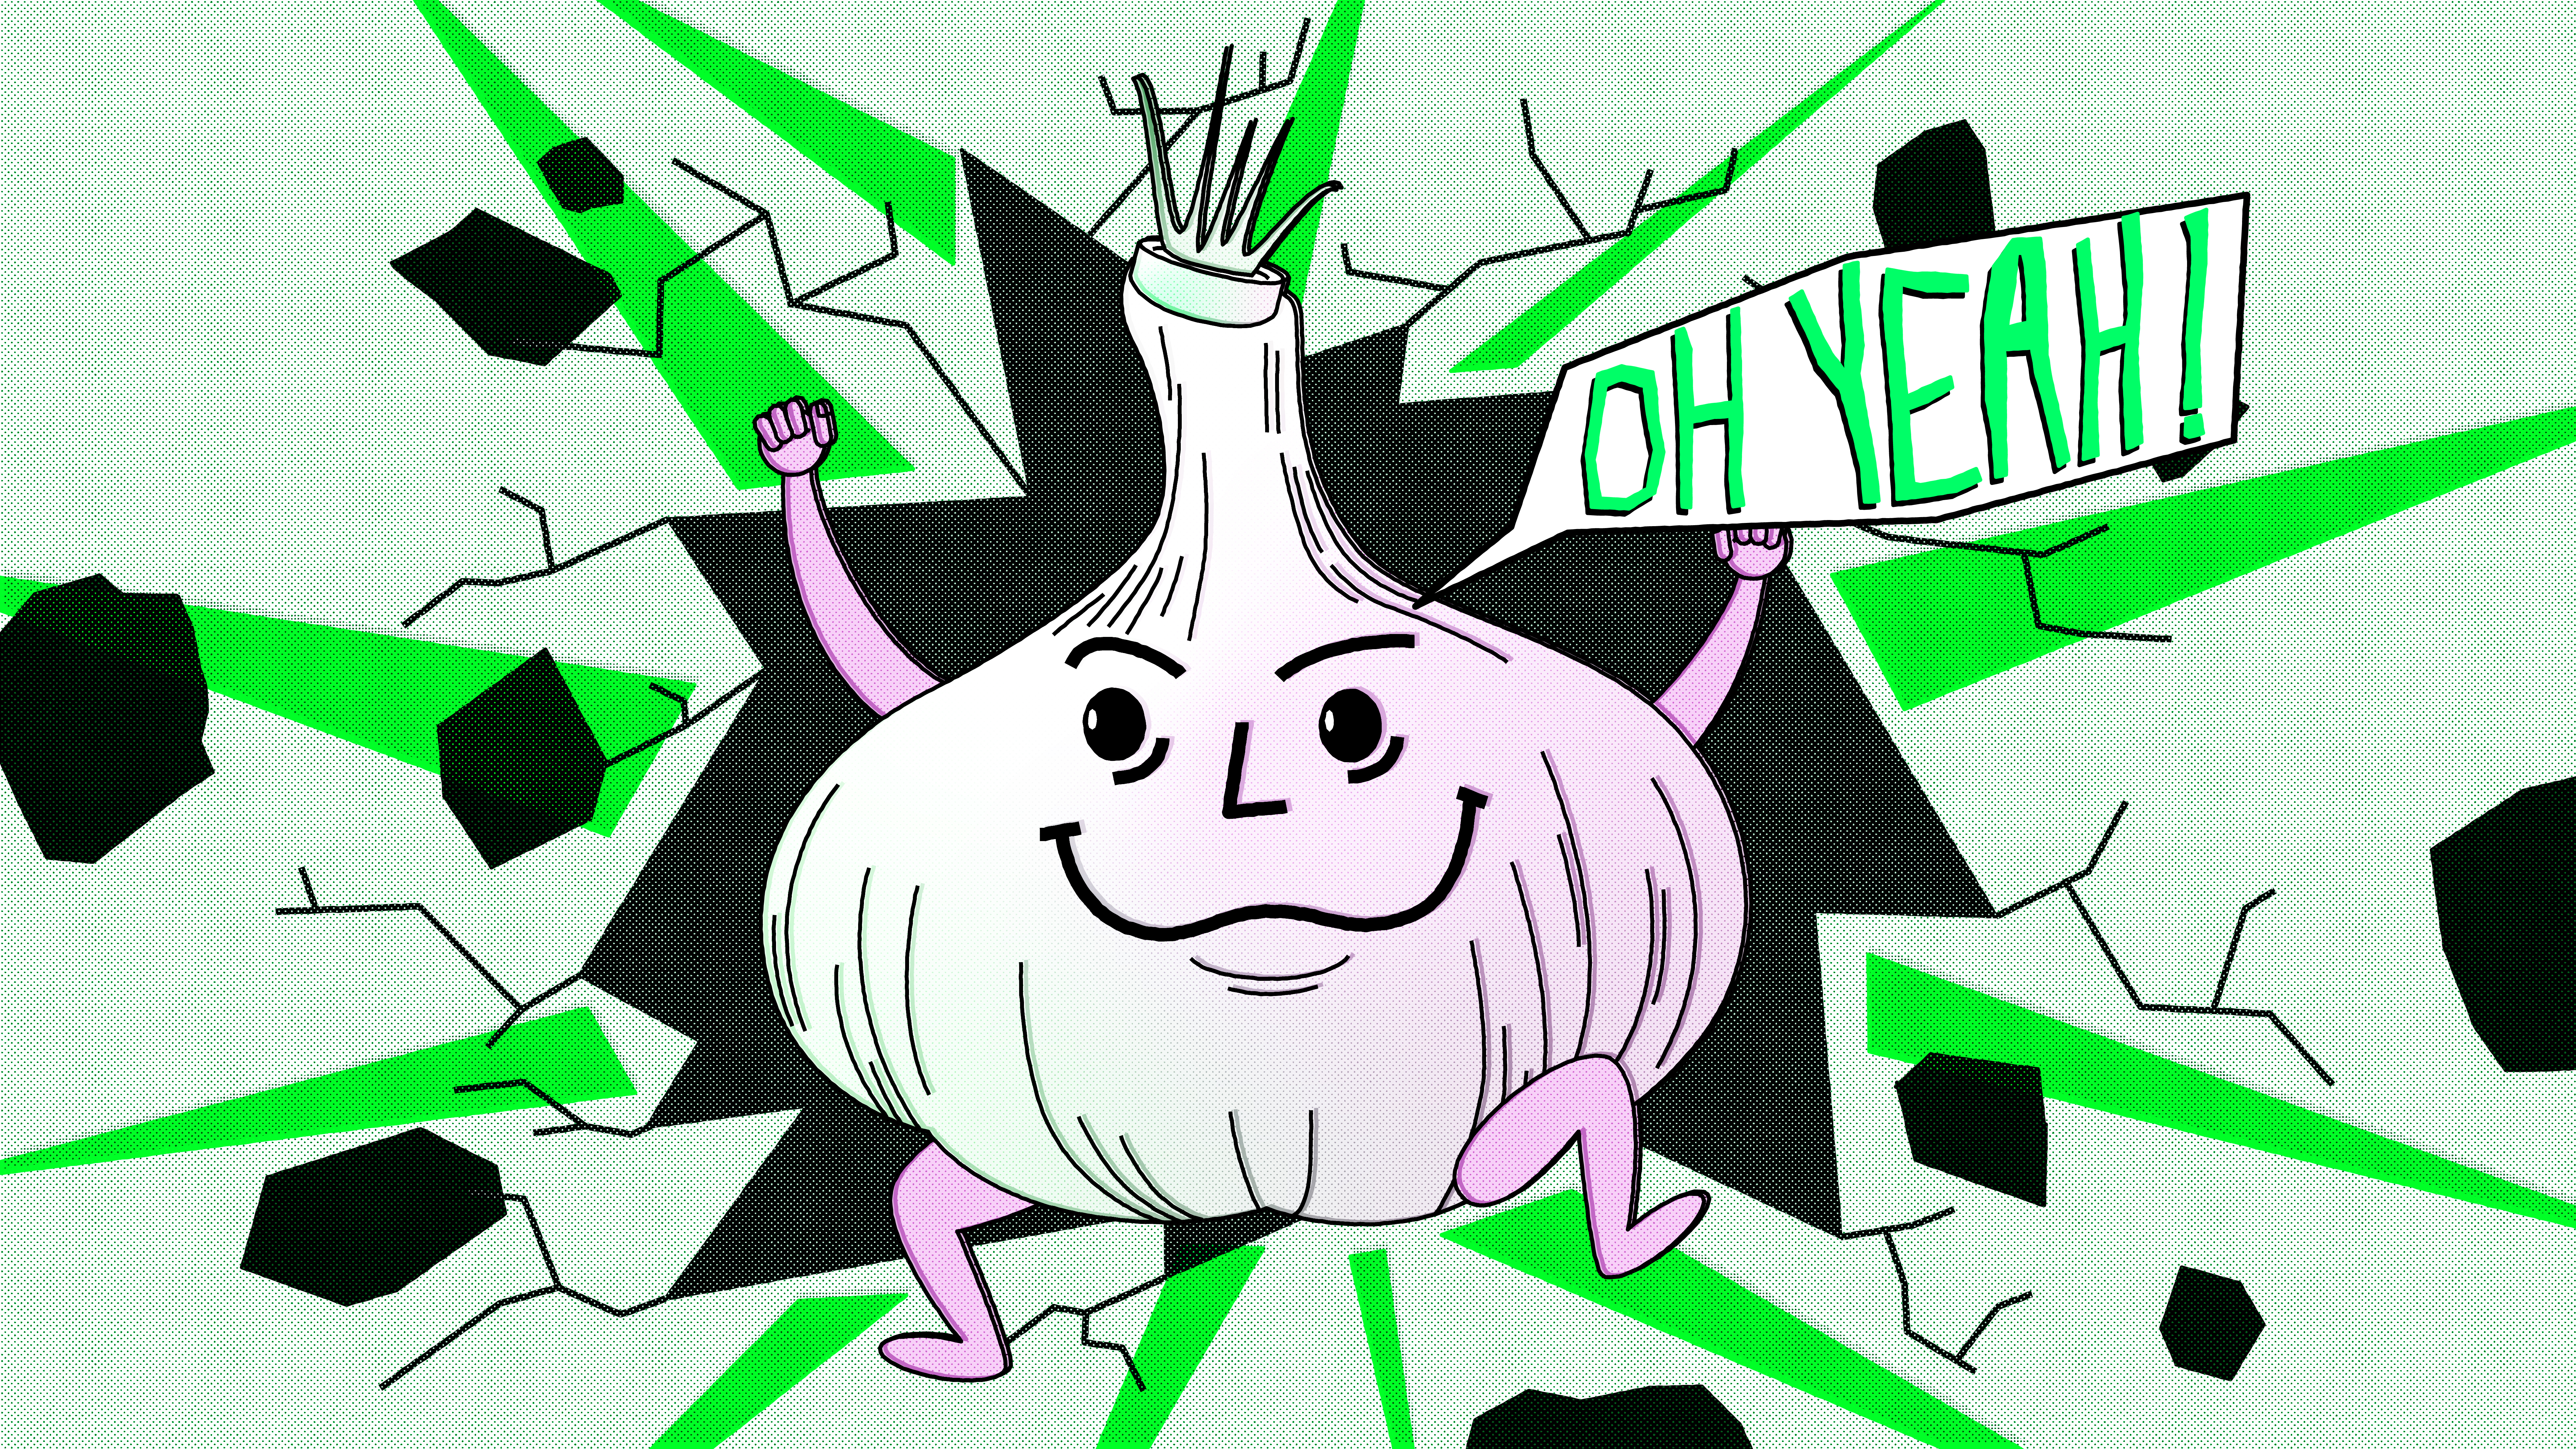 Illustration of a large garlic bulb busting through a wall while saying “oh yeah!”